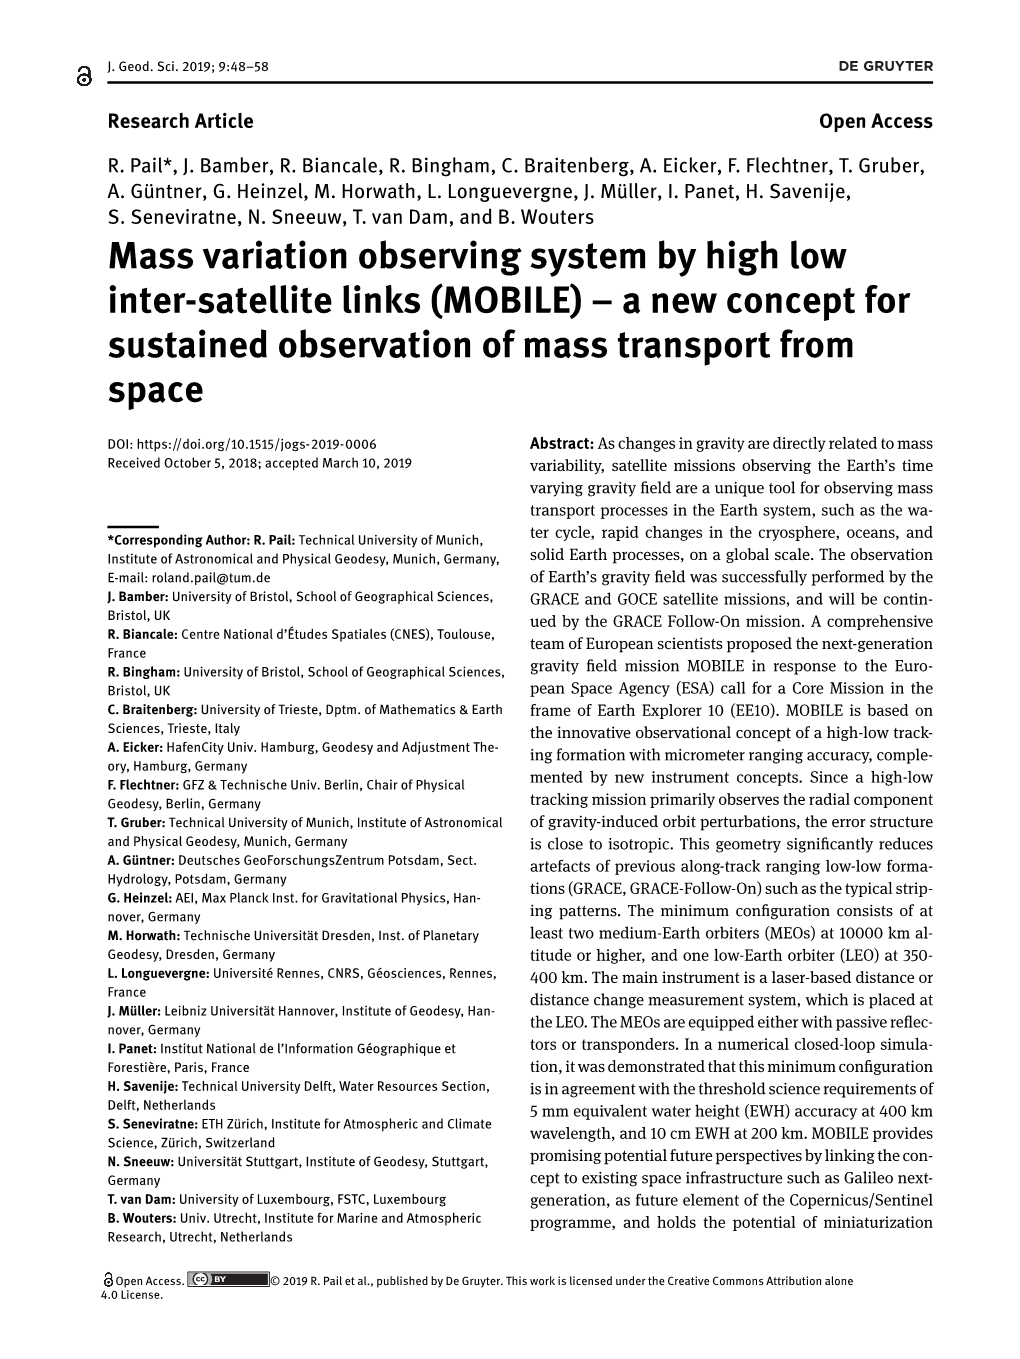 Mass Variation Observing System by High Low Inter-Satellite Links (MOBILE) – a New Concept for Sustained Observation of Mass Transport from Space